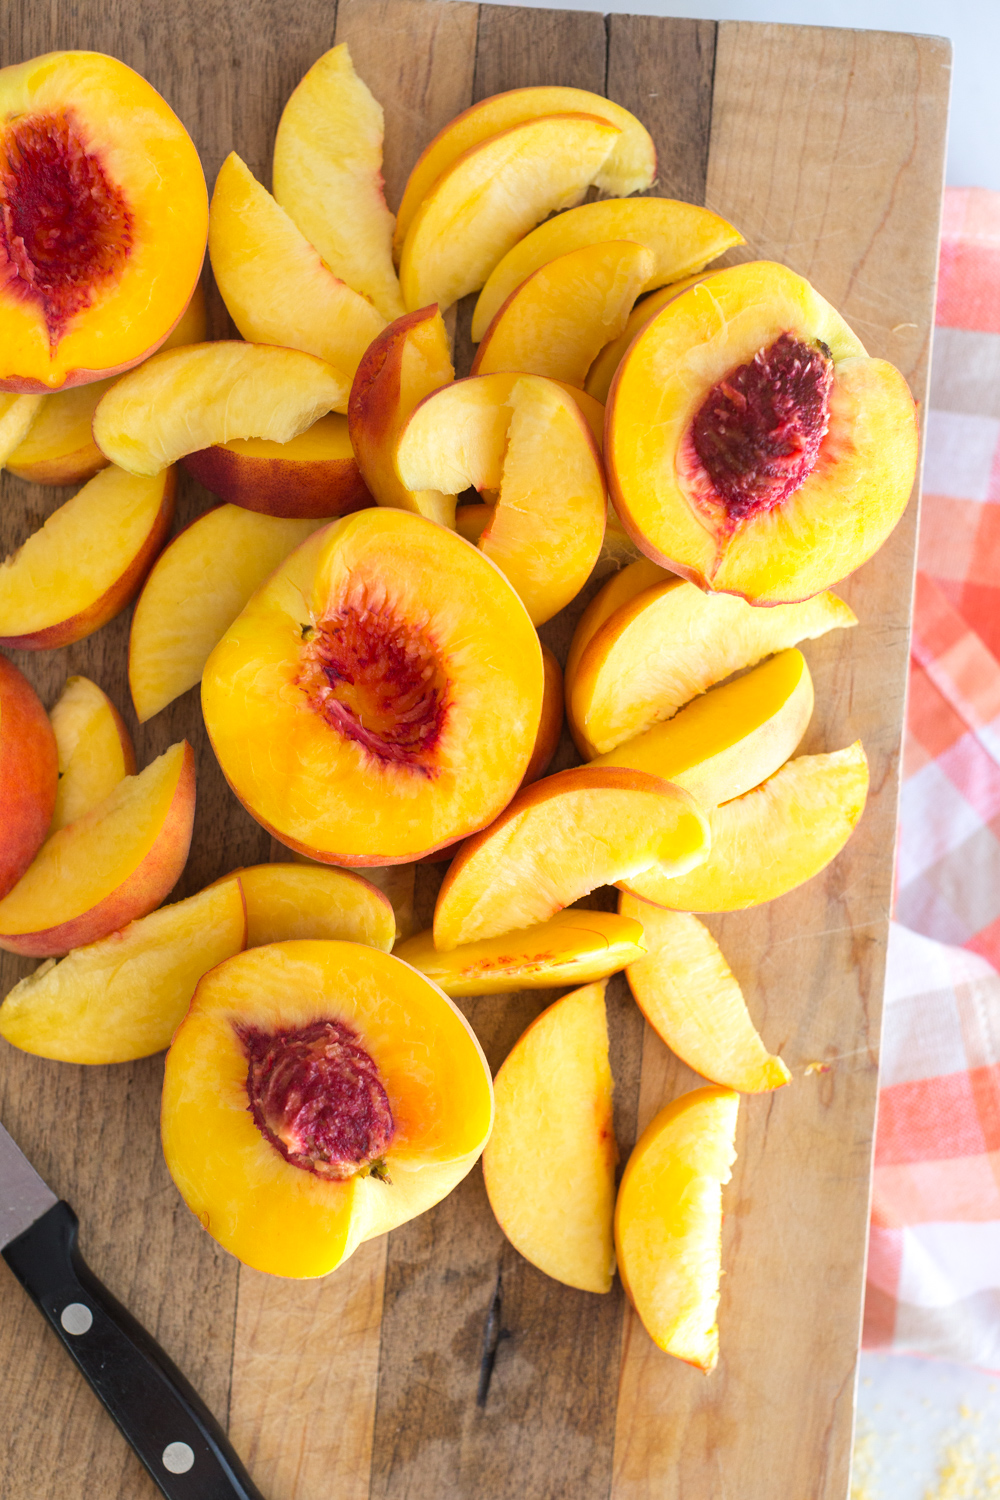 Peaches for Blueberry Peach Cornmeal Skillet Cake by Baking The Goods